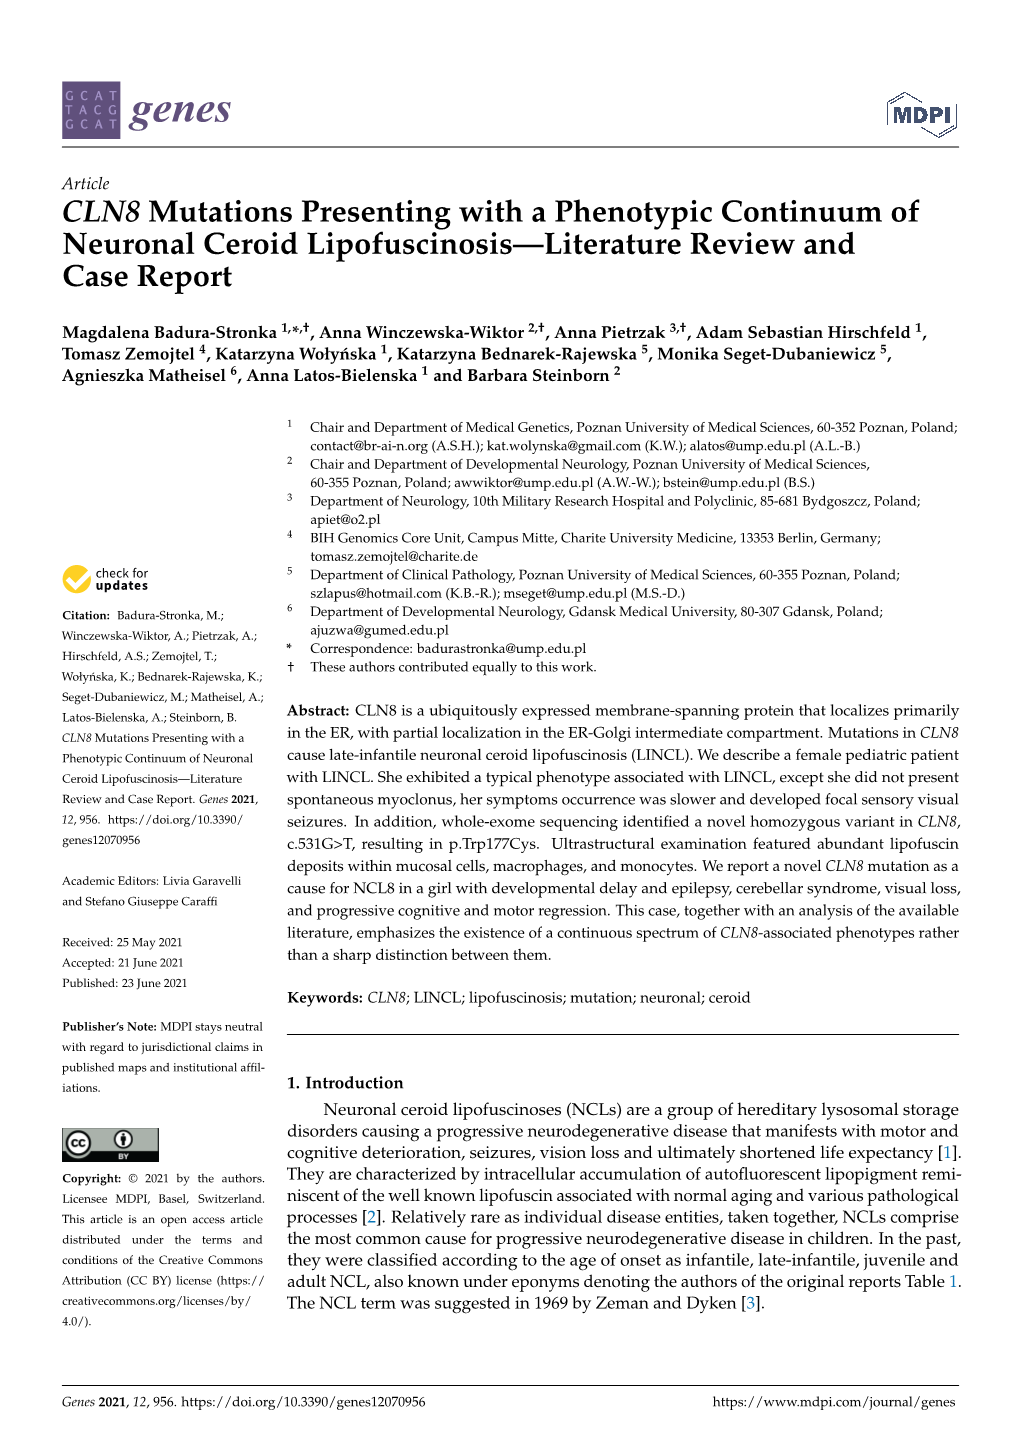 CLN8 Mutations Presenting with a Phenotypic Continuum of Neuronal Ceroid Lipofuscinosis—Literature Review and Case Report